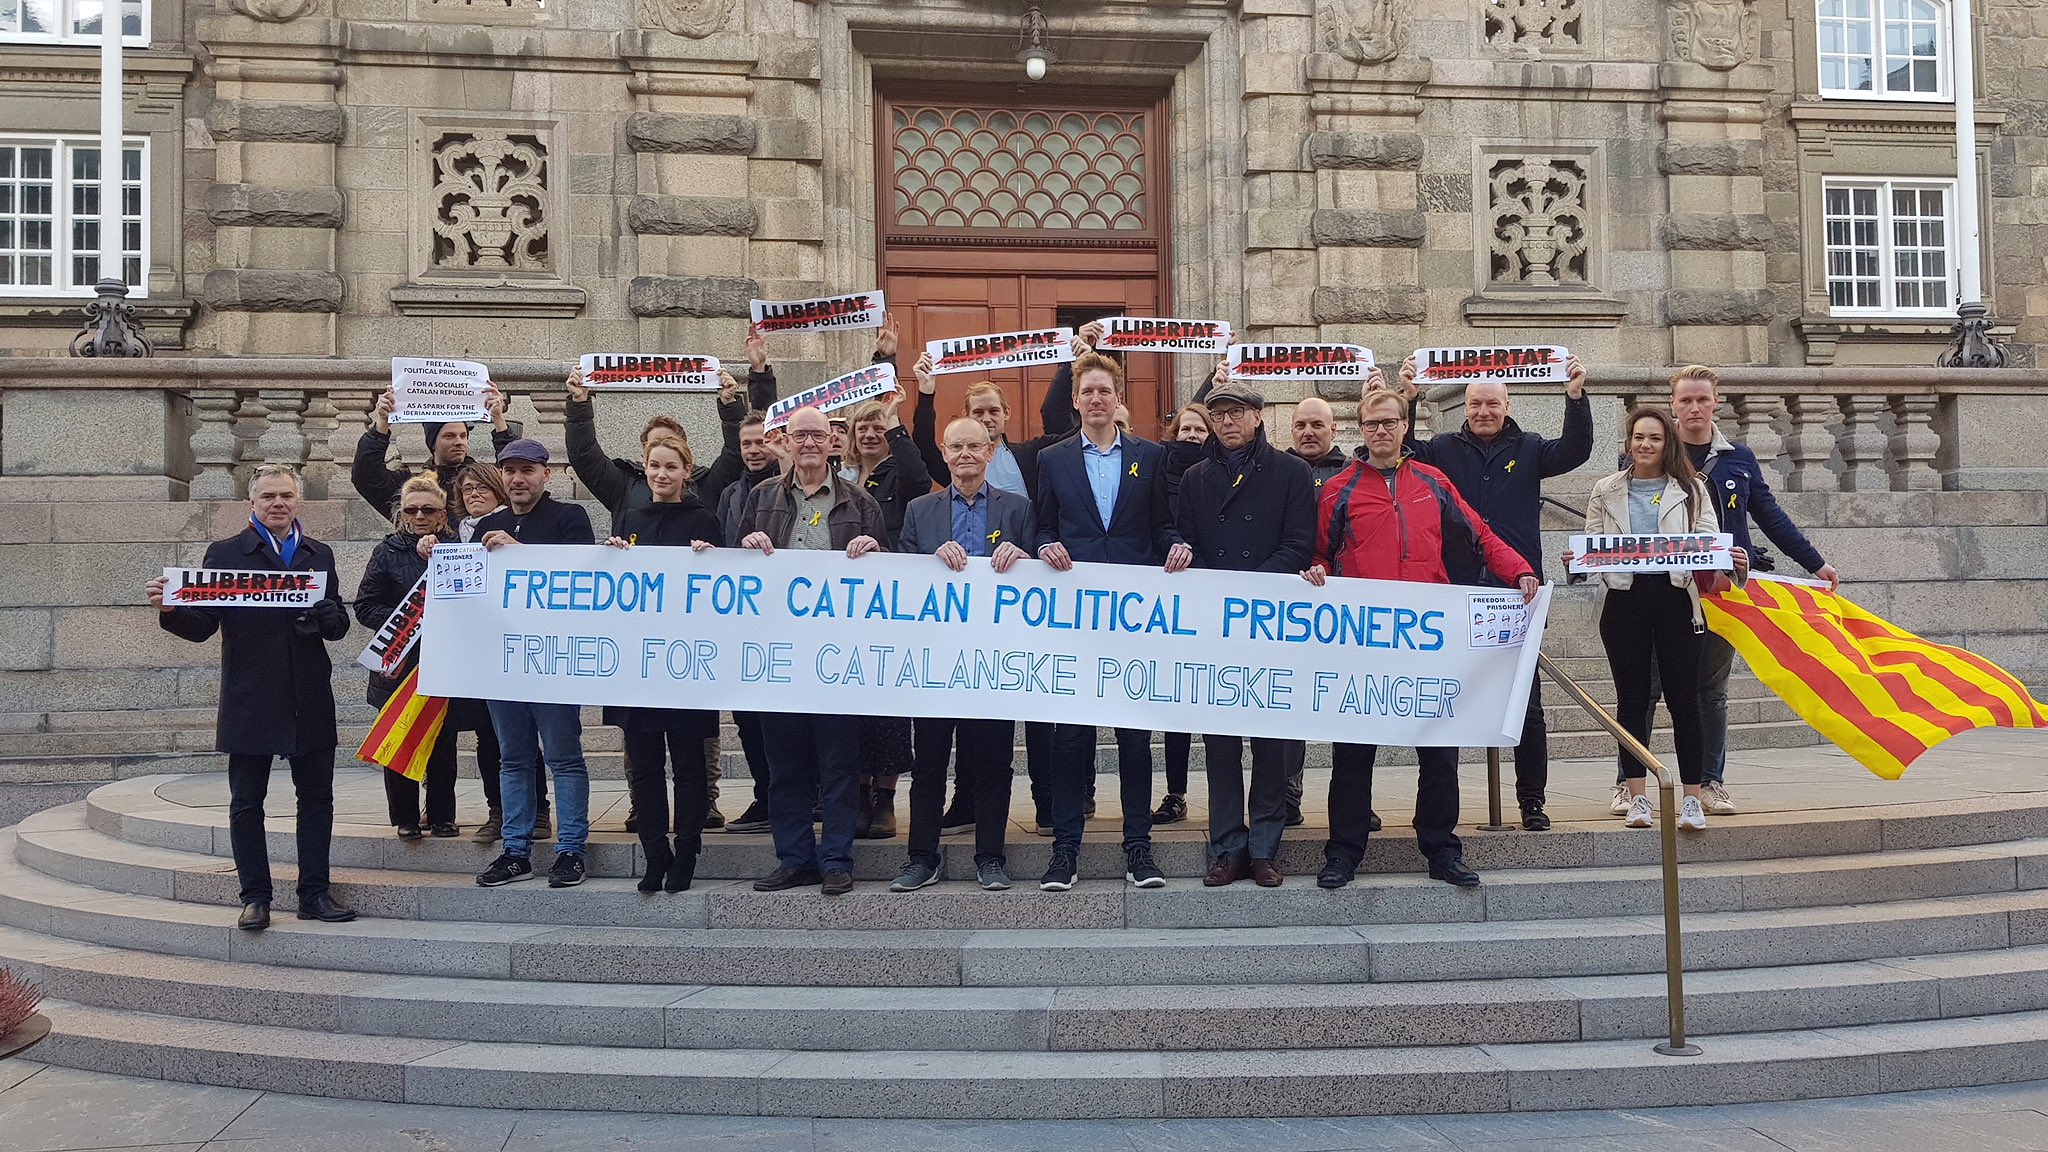 Nine Danish MPs hold protest calling to free the Catalan political prisoners